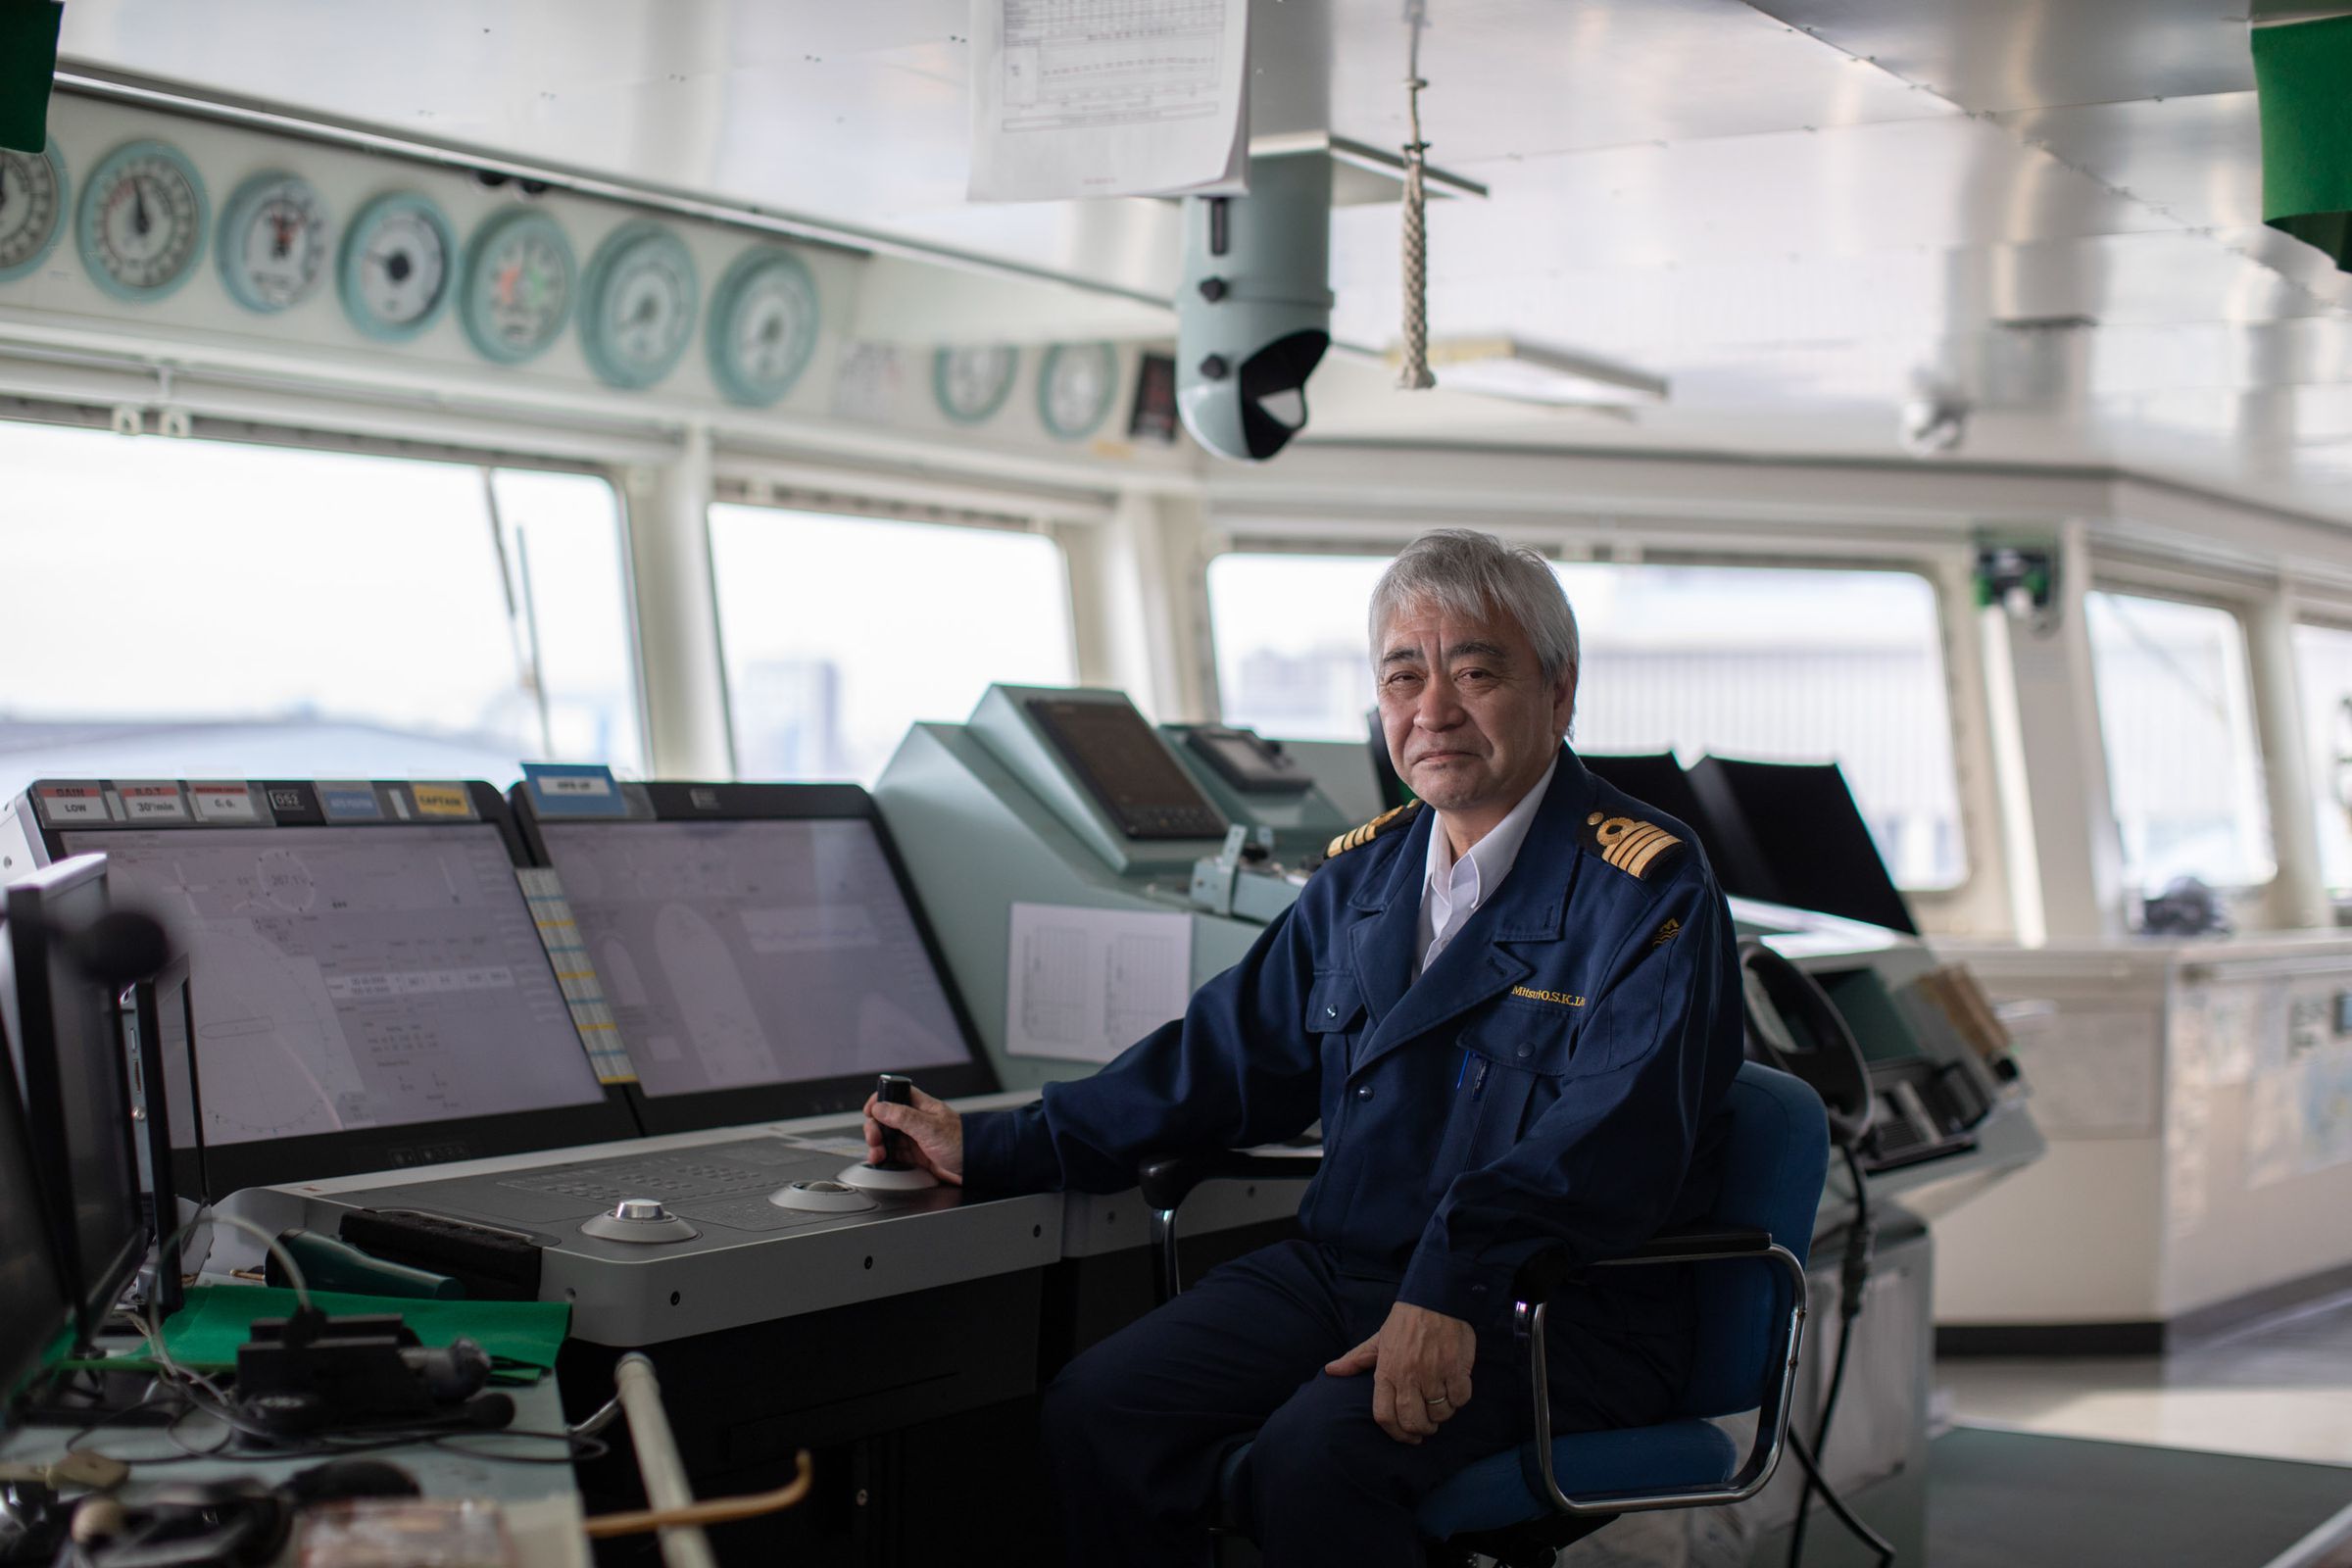 Captain Shoichi Suzuki sits in front of the control panels in the bridge of the Ocean Link.